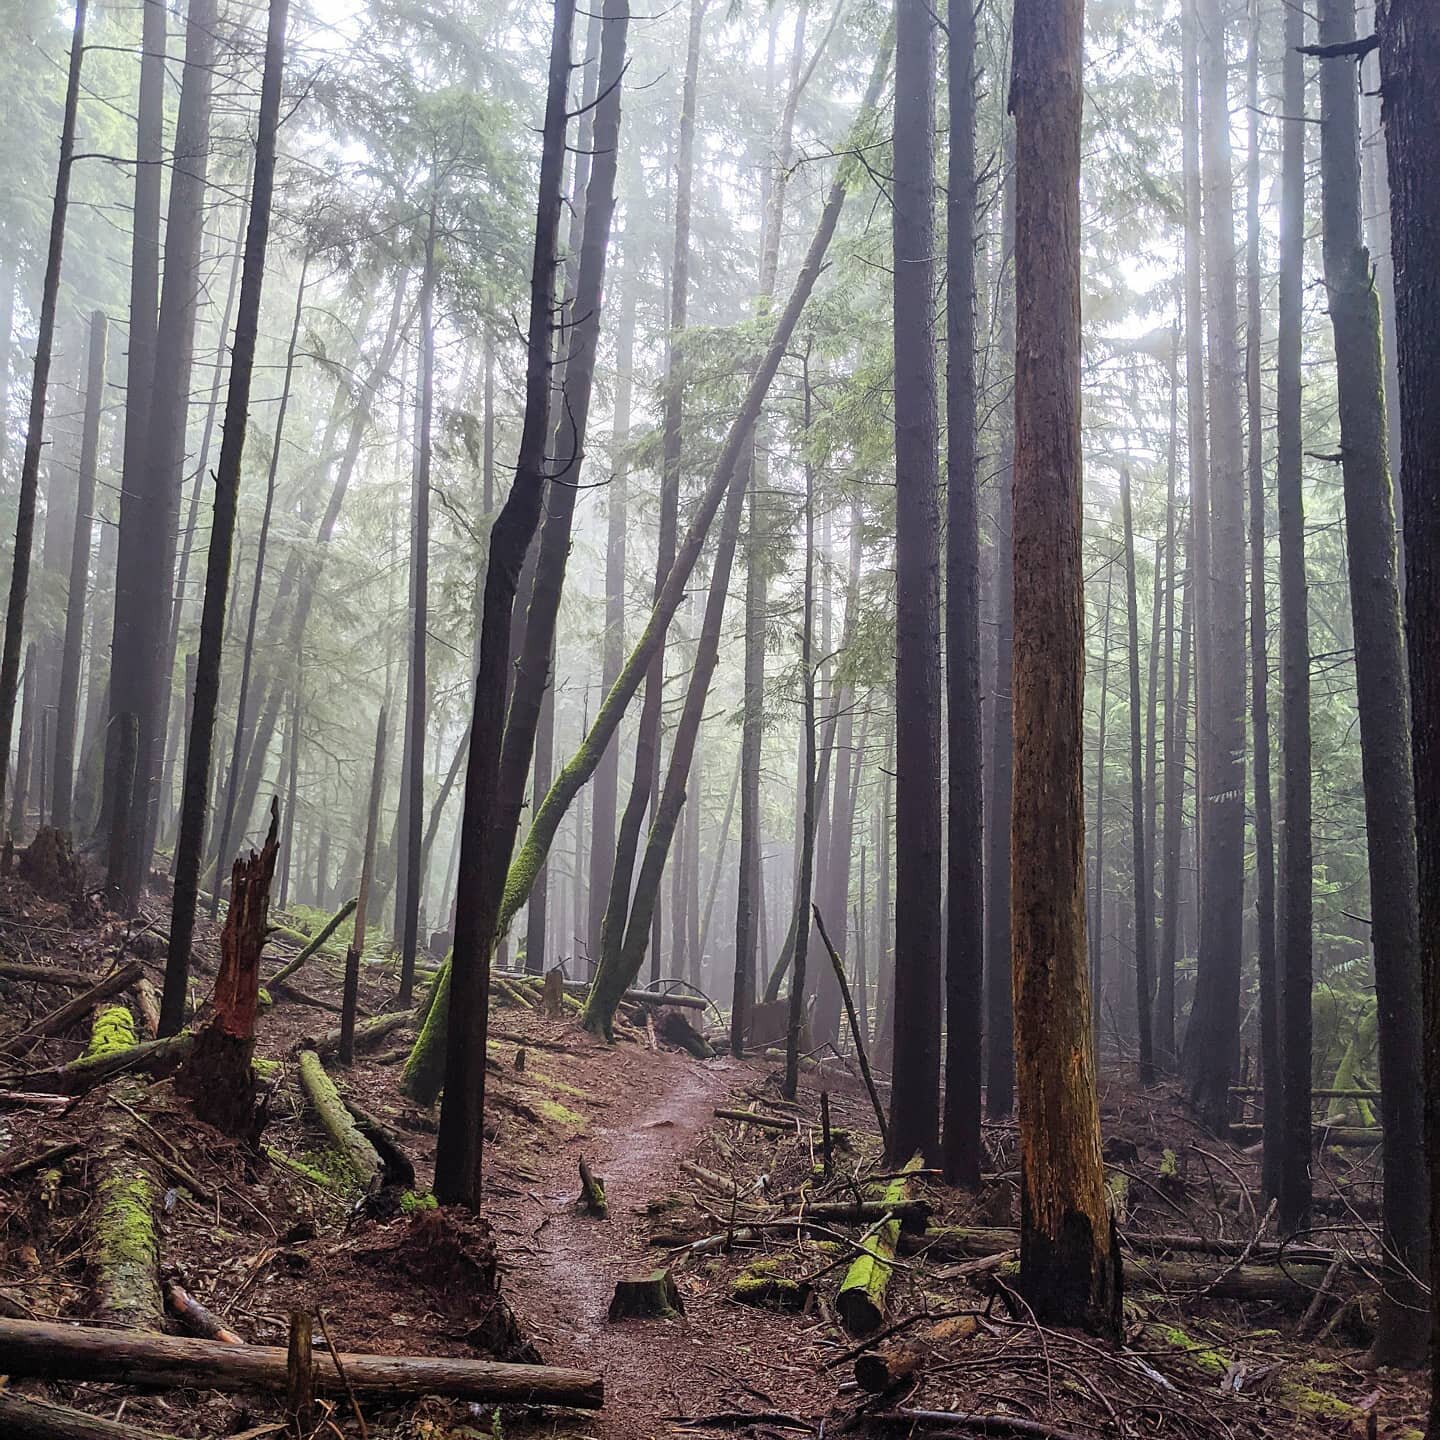 The spooky vibe of the trails around the summit of Squak Mountain speaks to the dark &amp; spooky part of my soul. 🖤 Also, this short (cold, rainy, super hygge) hike with a wonderful friend was exactly what I needed to kick myself out of my 2020 glo